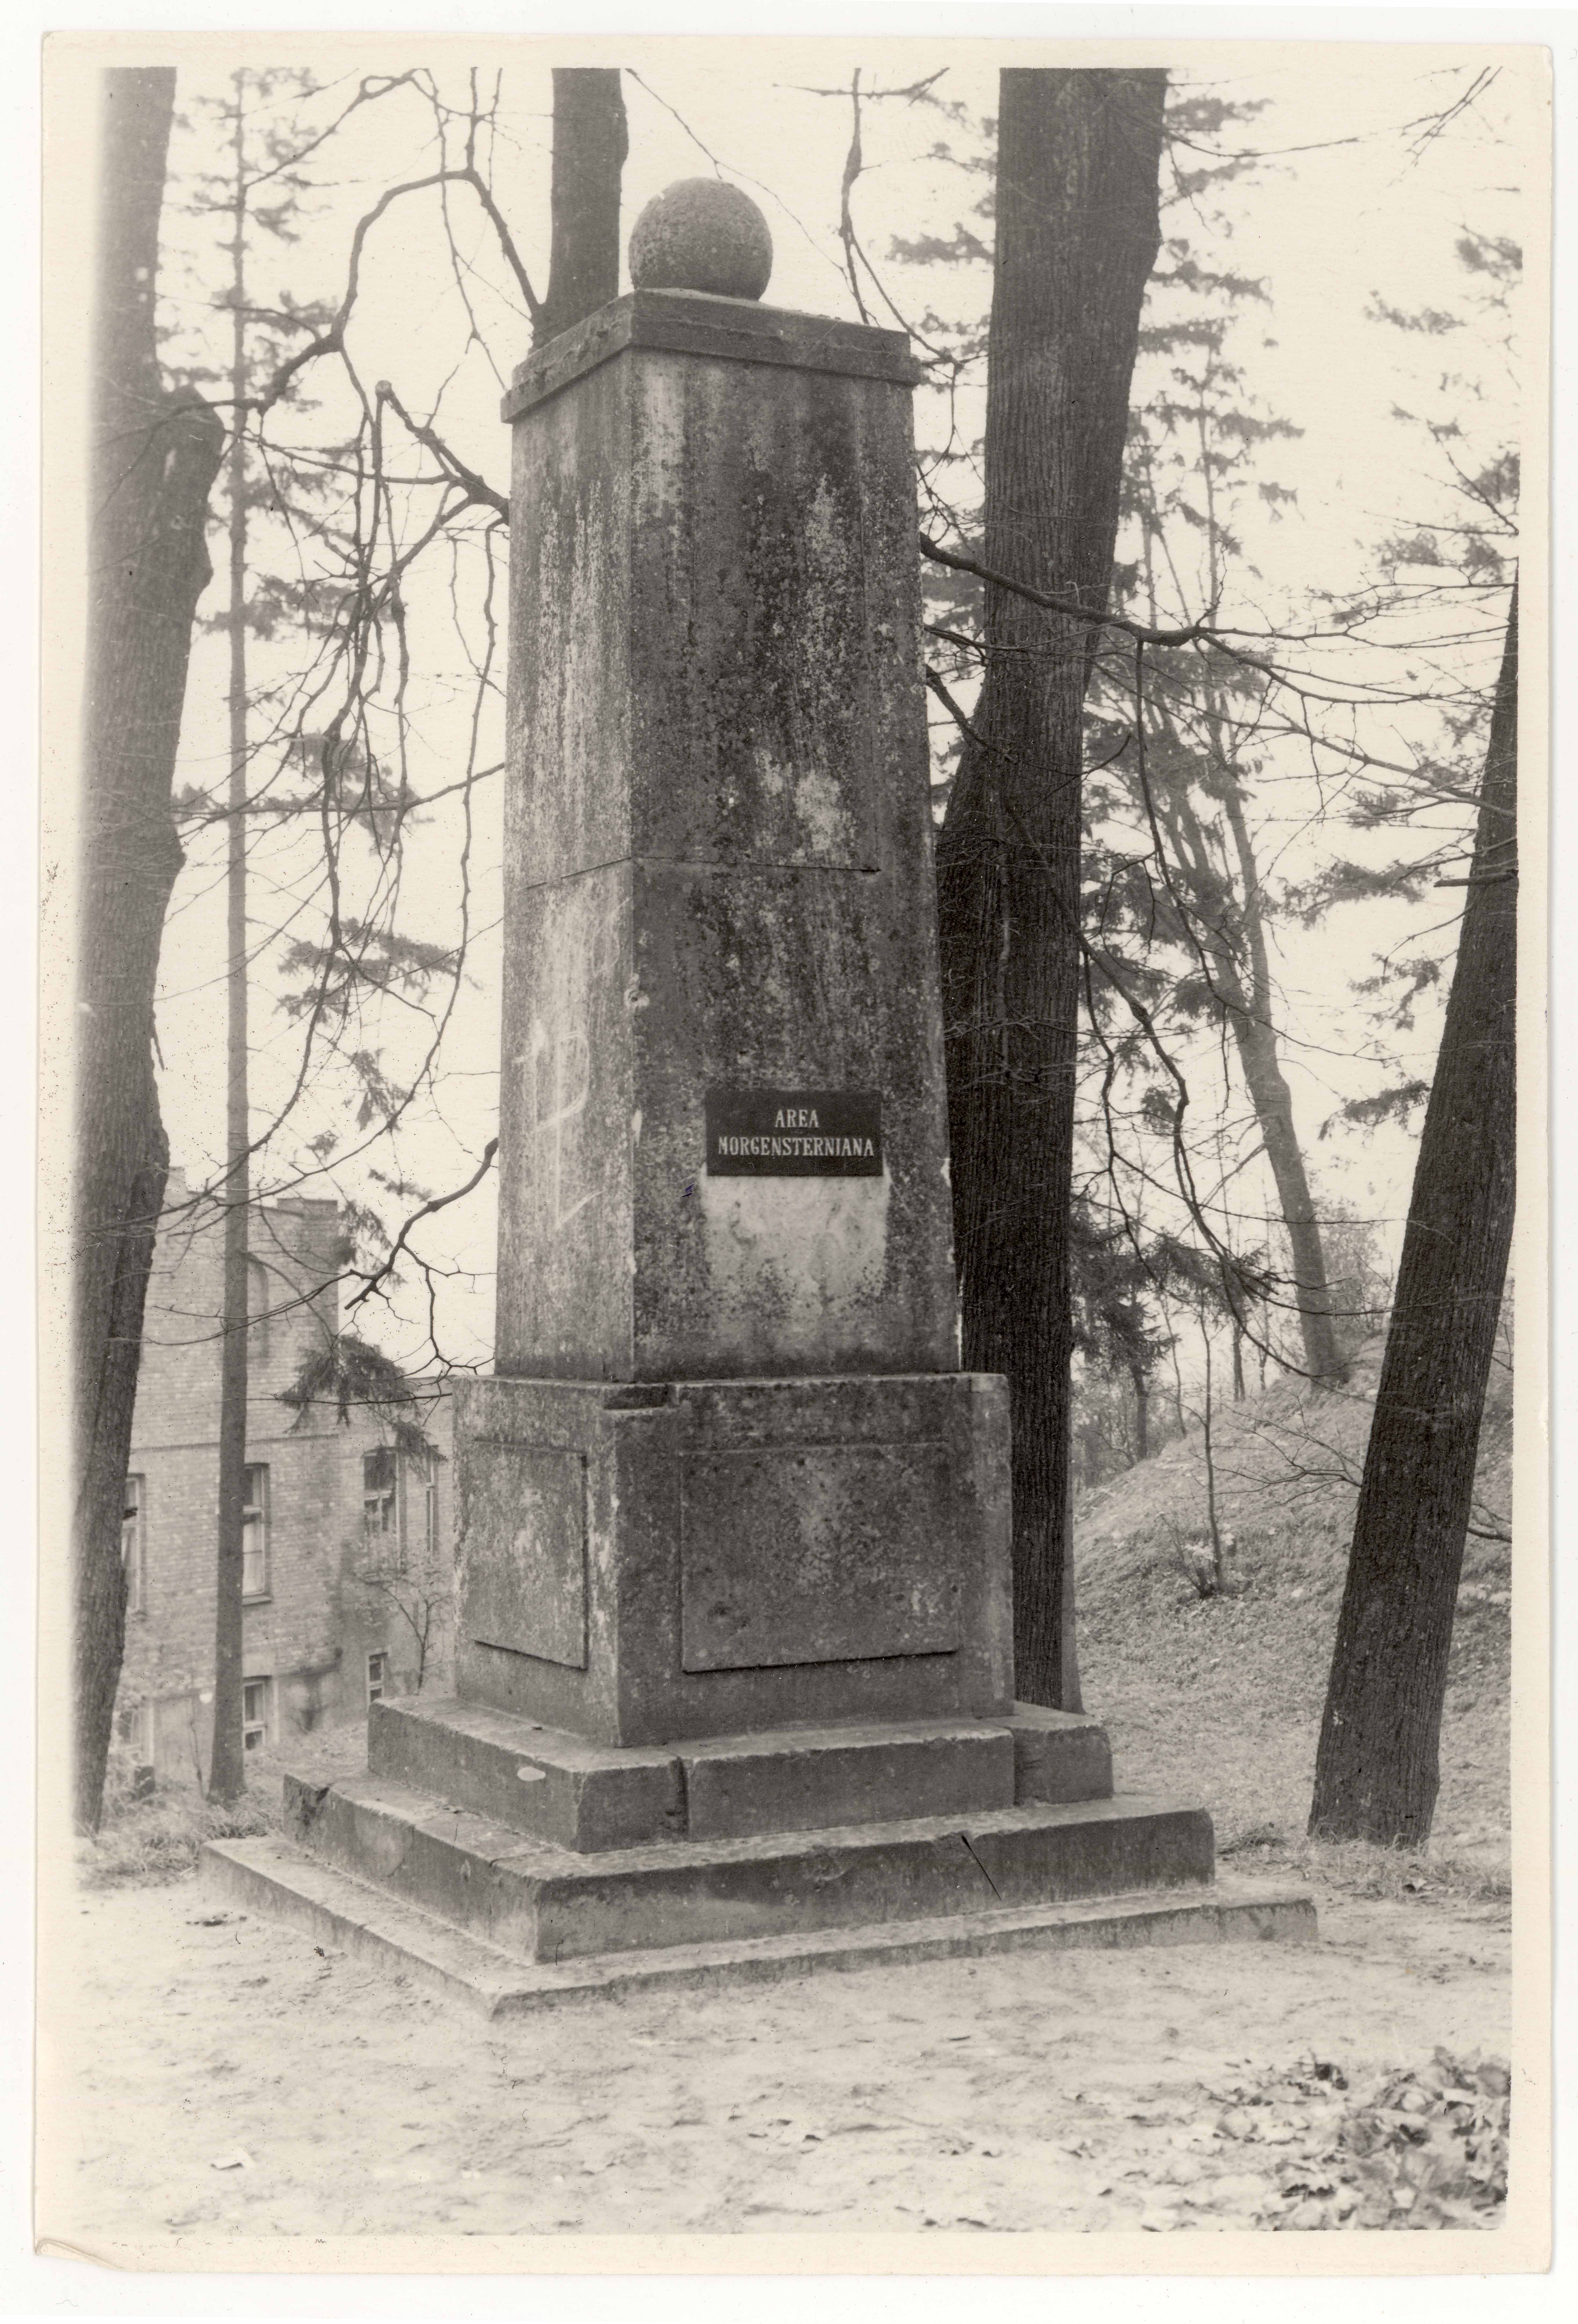 Morgenstern monument on the hill of Toomemäe